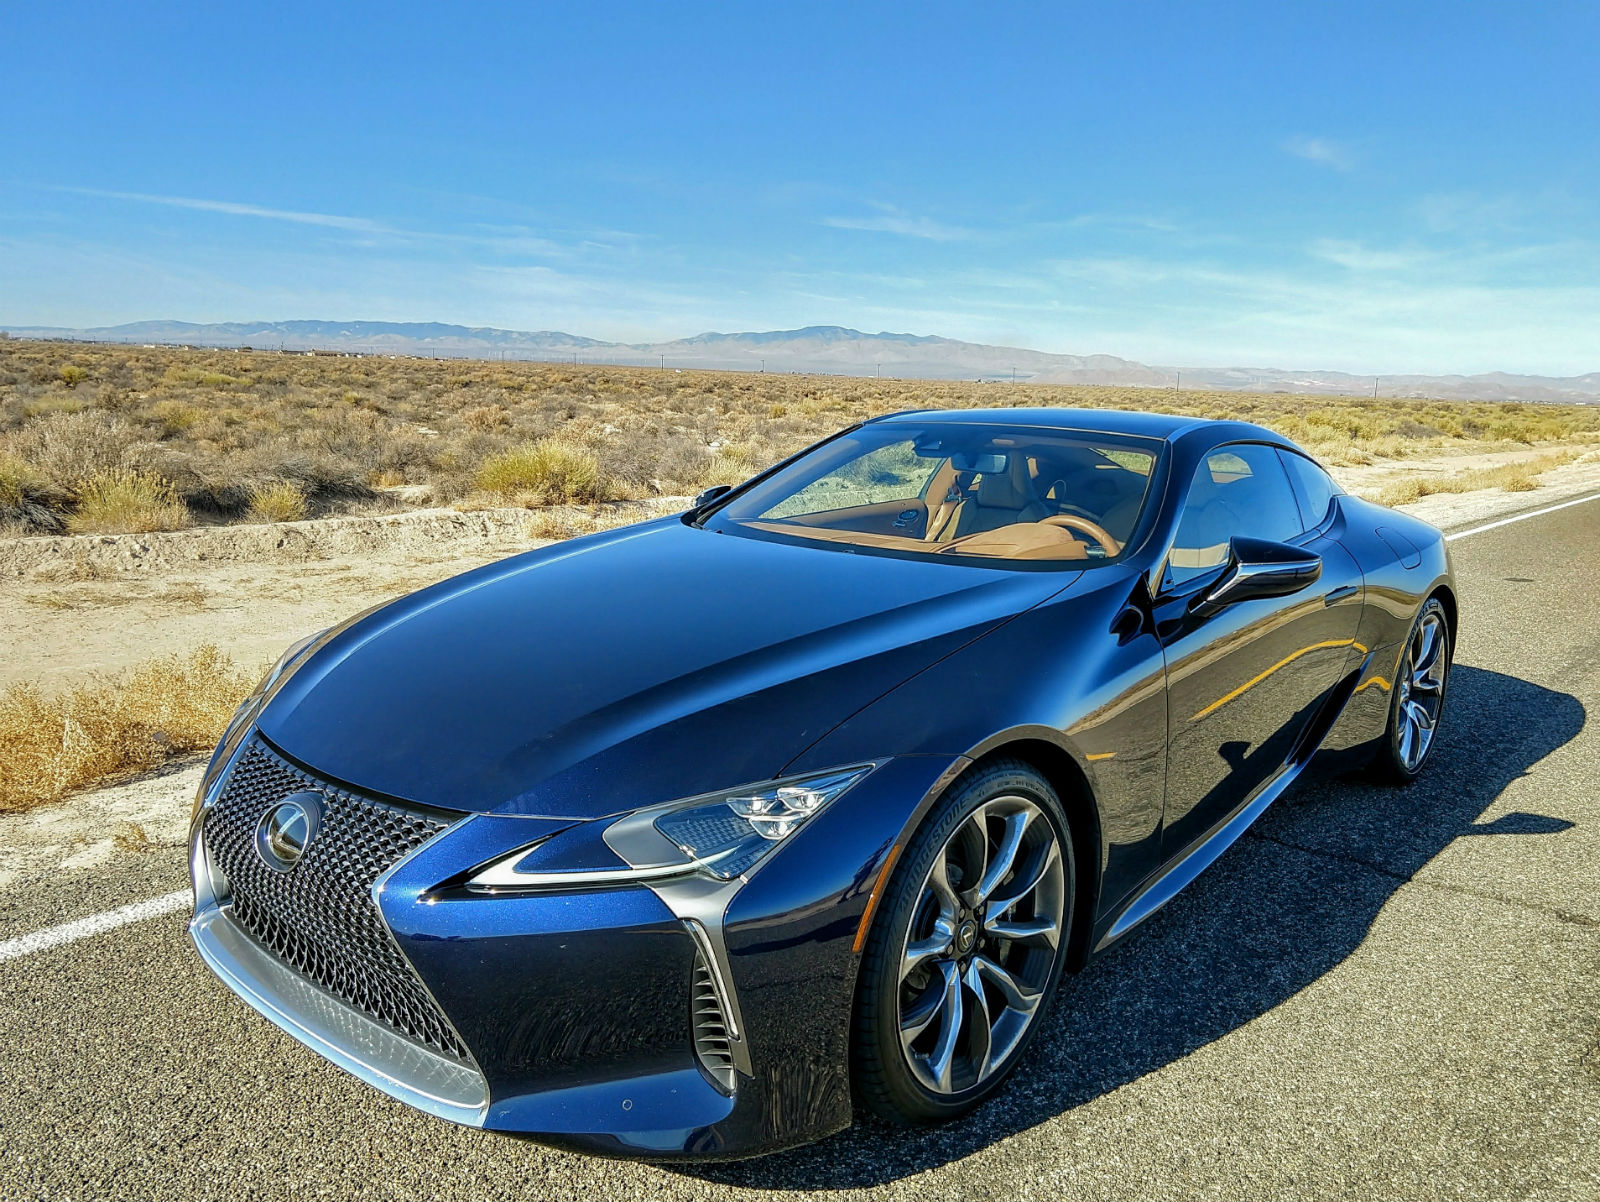 Vehicle Of The Year 2018 Lexus Lc 500 The Ignition Blog